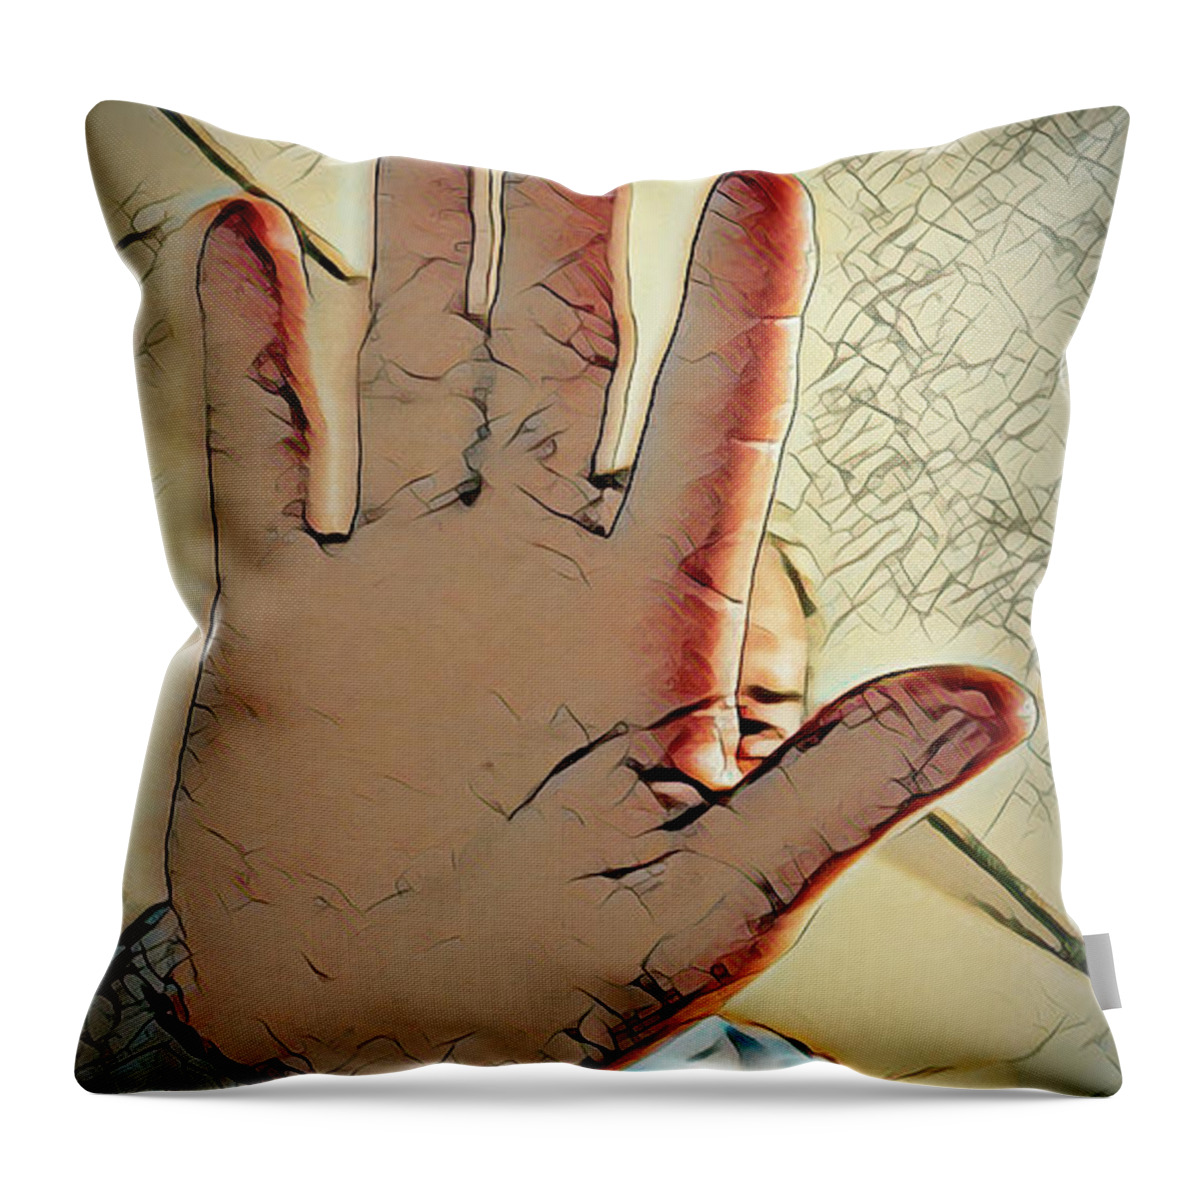 Hand Throw Pillow featuring the photograph I Can Still See You by Roberta Byram